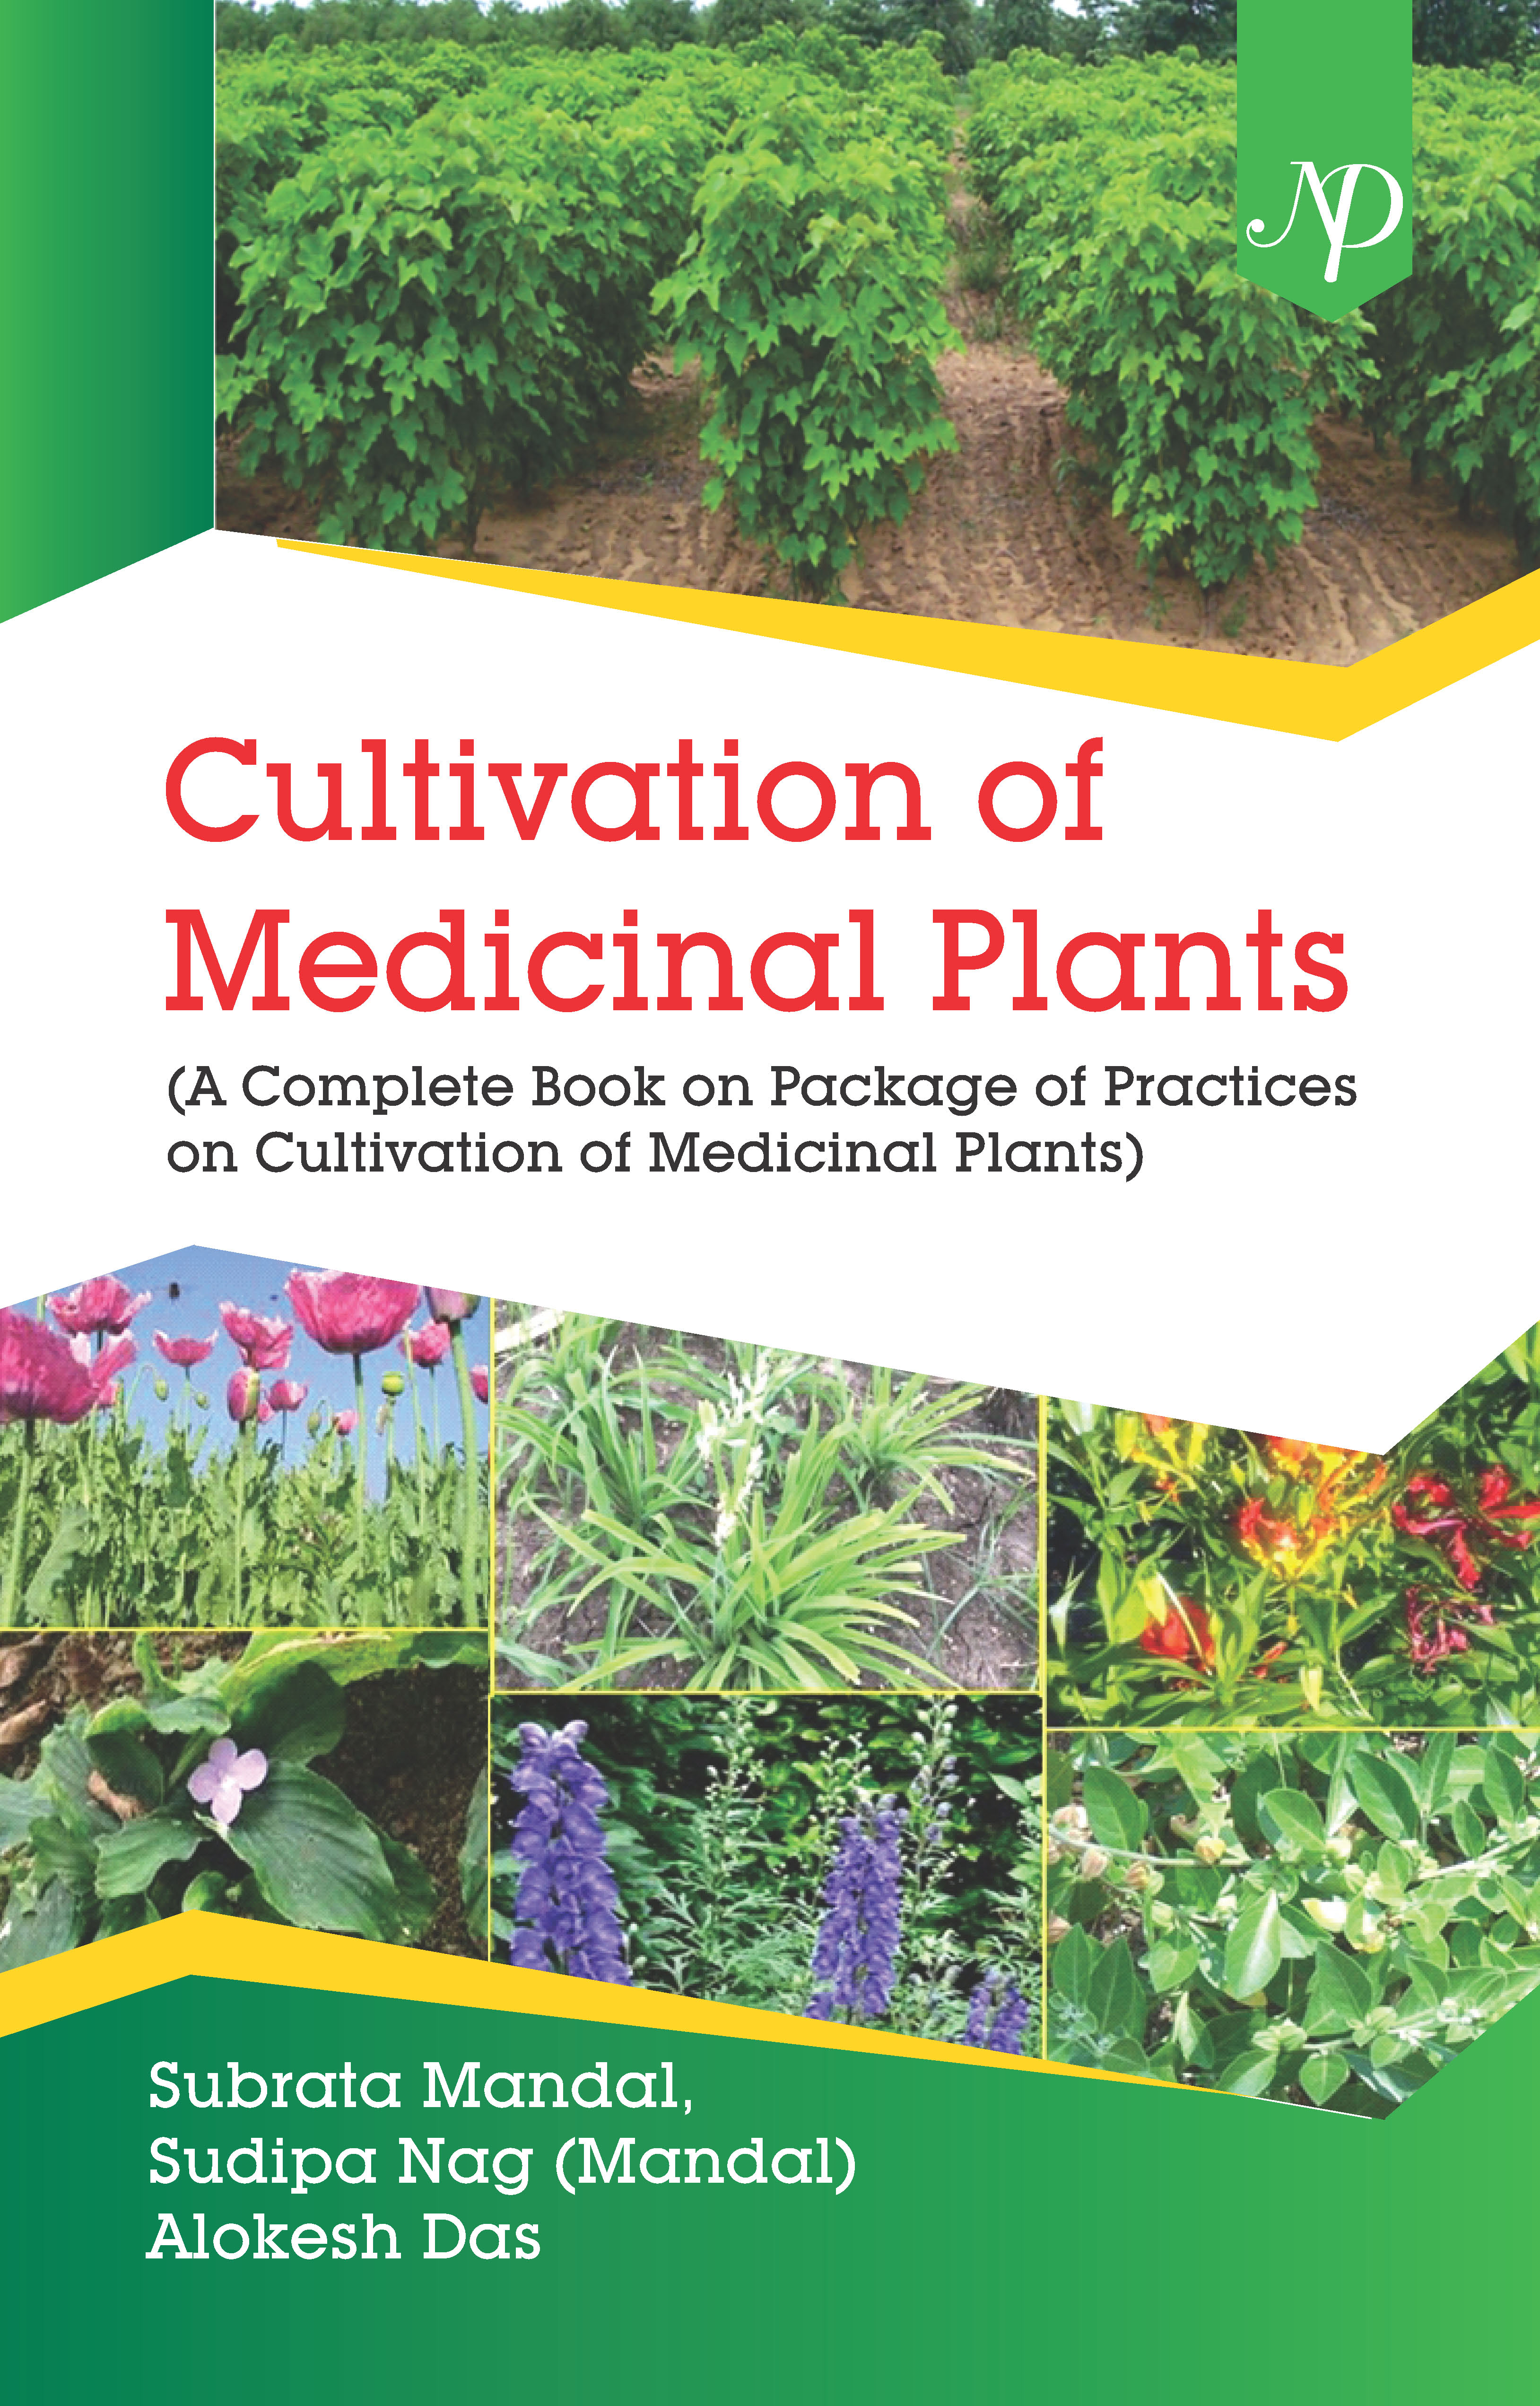 Cultivation of Medicinal Plants Cover.jpg